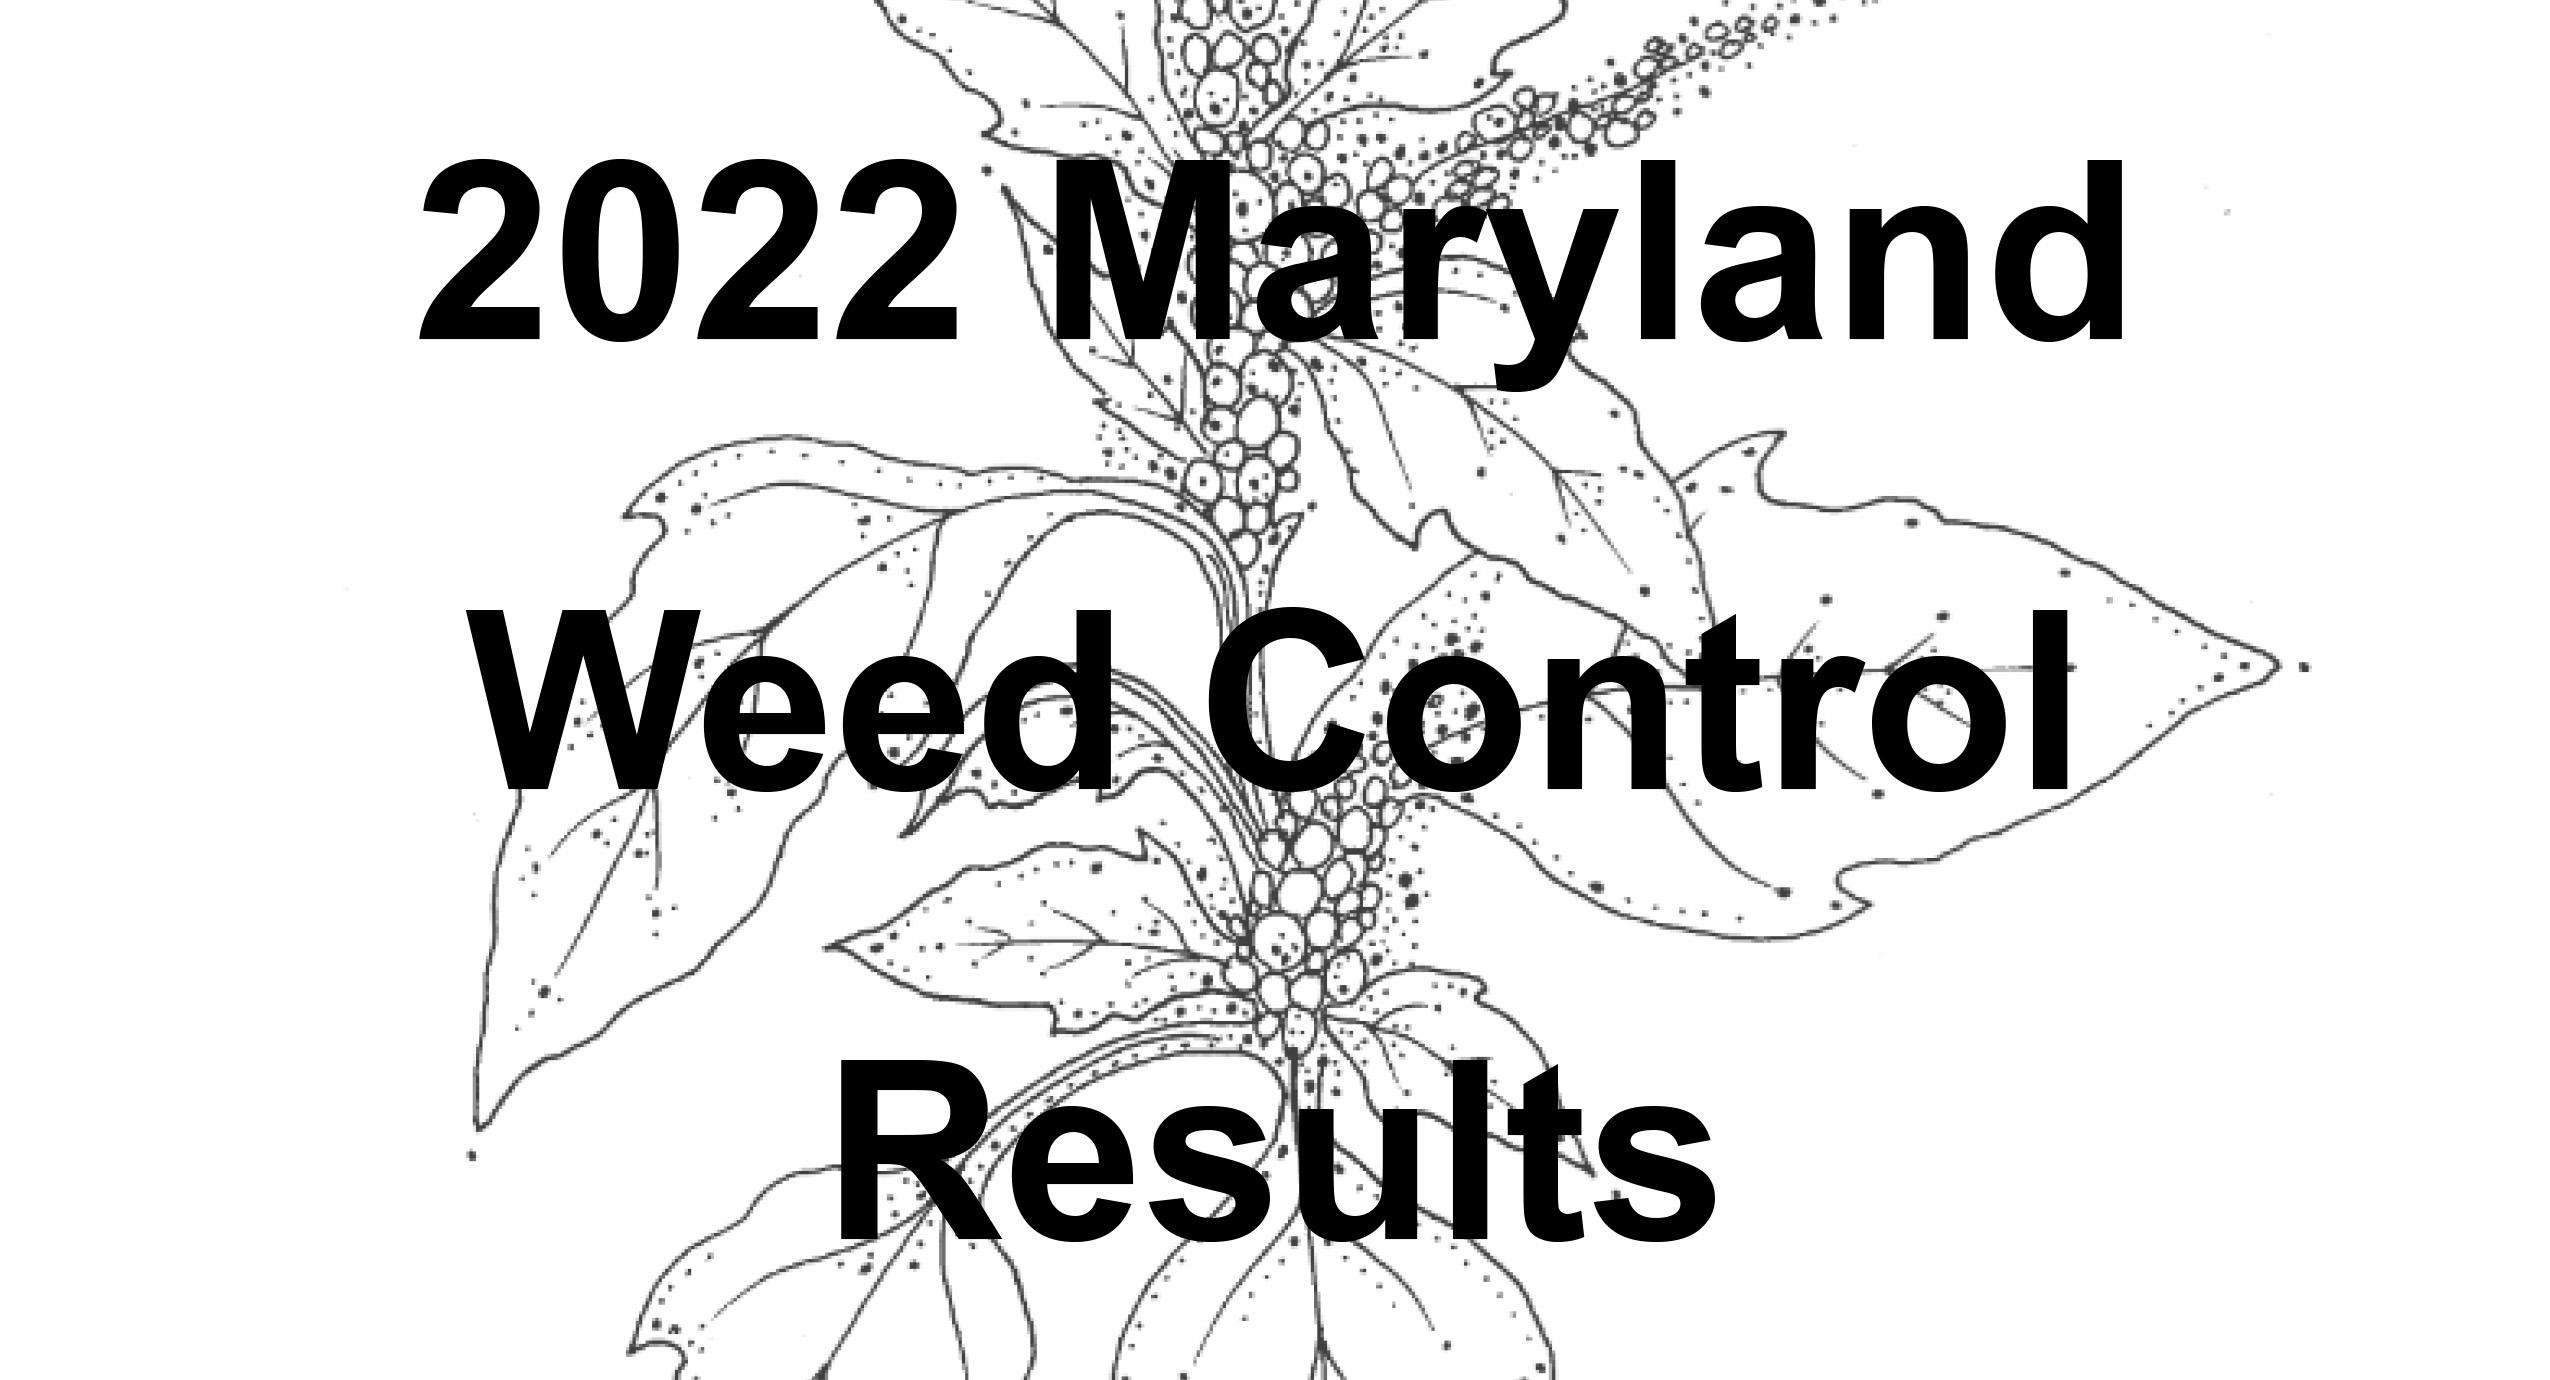 Weed Control Trial results